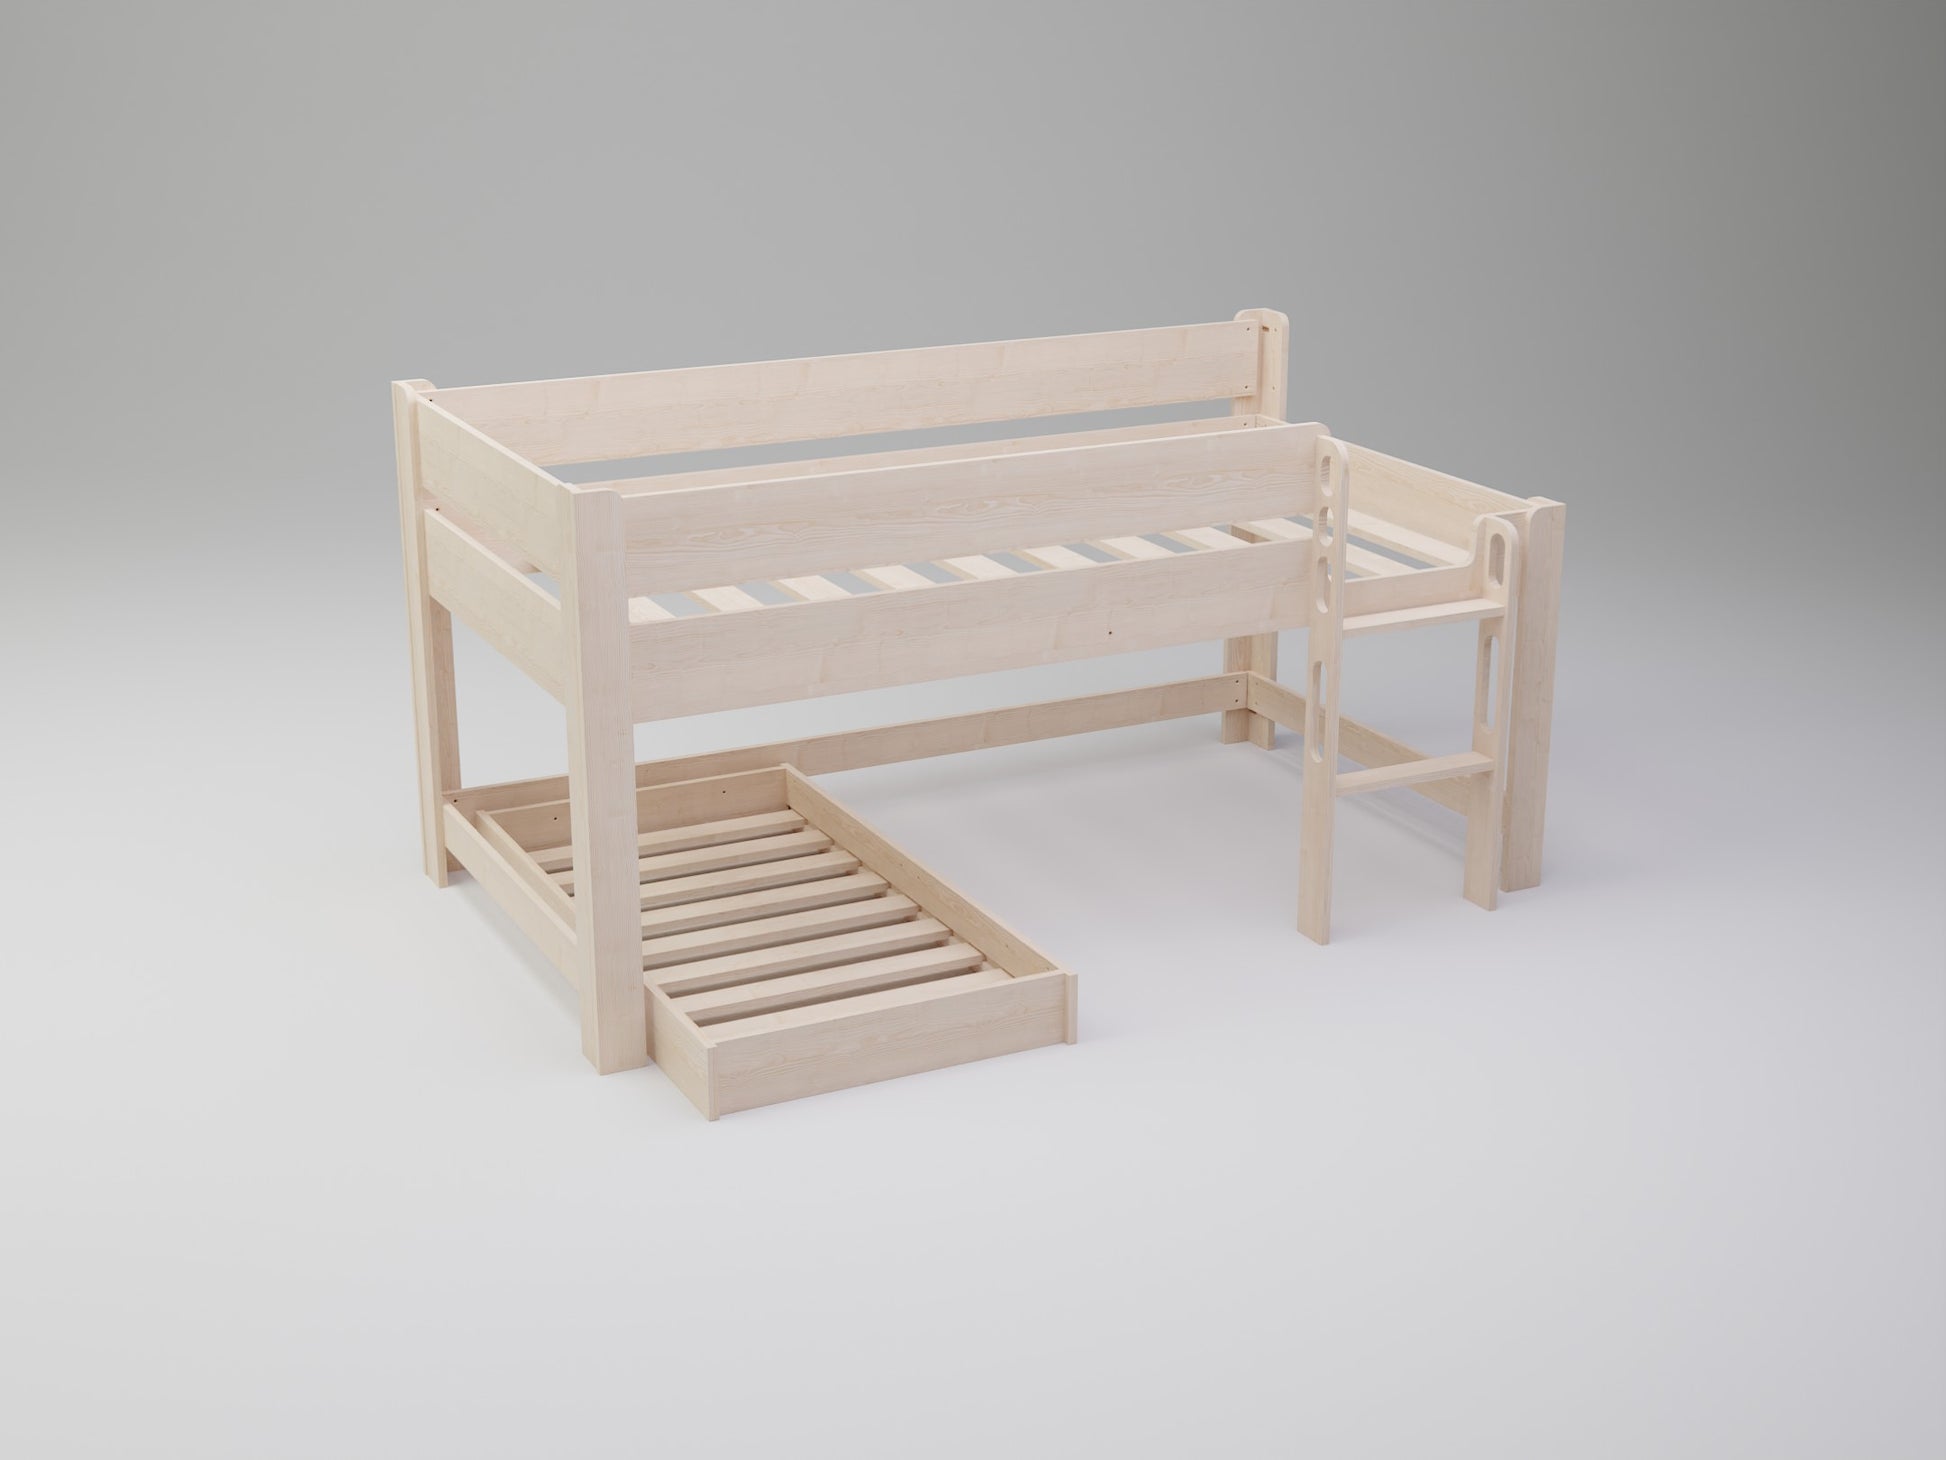 Pure NZ Pine Craftsmanship: Experience the finest L shaped loft bed with longevity & aesthetic beauty.